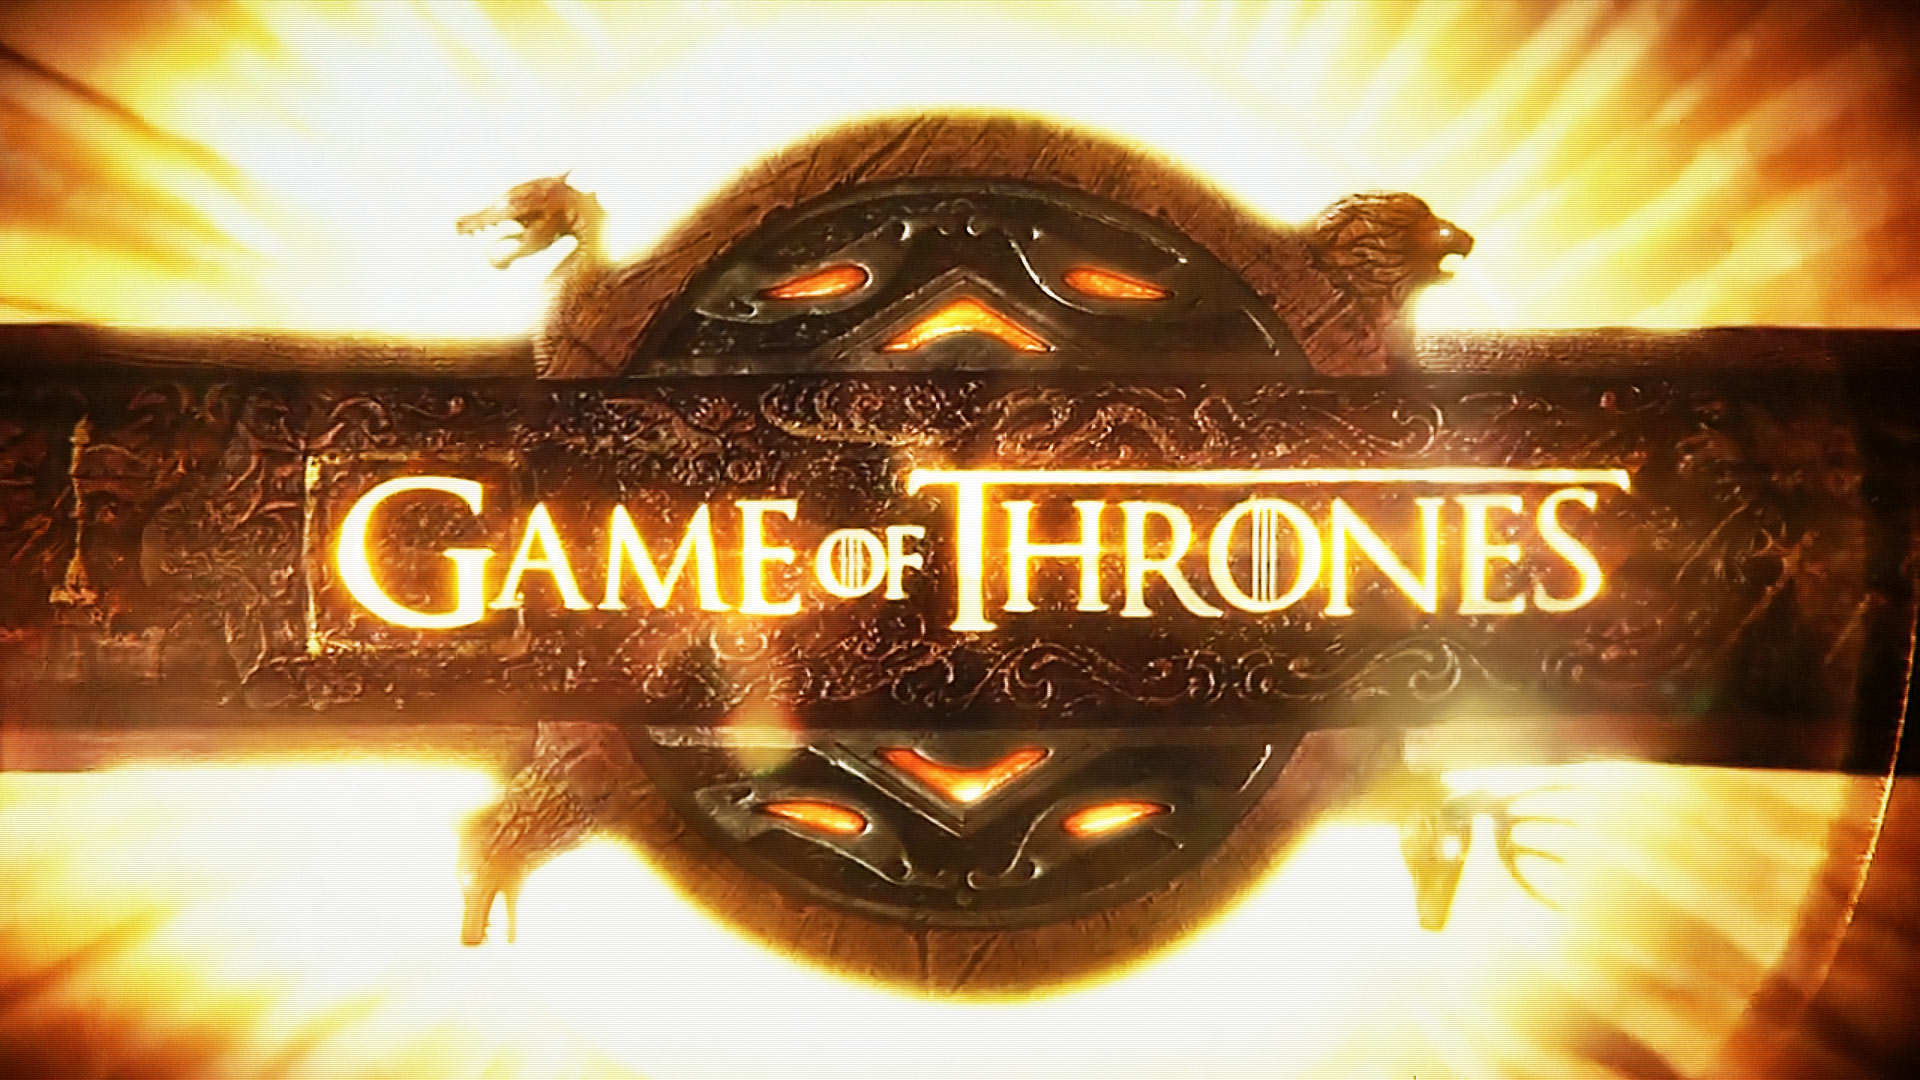 First Trailer For Game Of Thrones Season 5